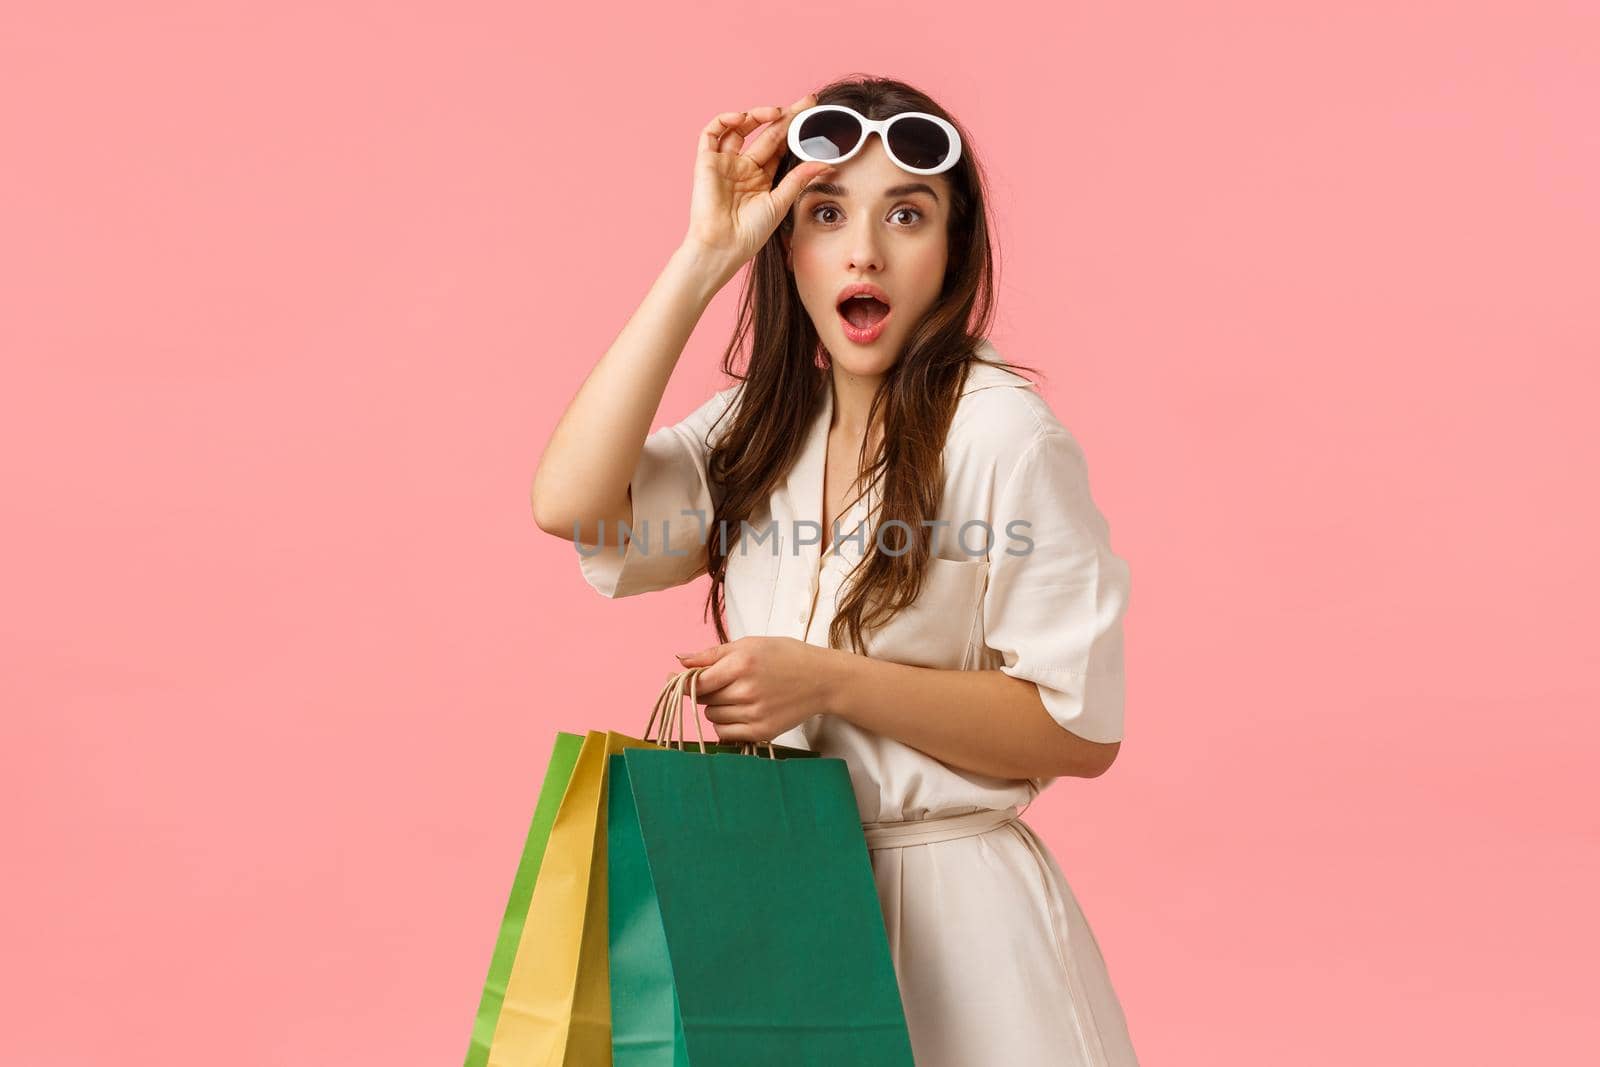 Amused feminine girl, waisting all money on new clothes, found favorite store, holding shopping bags and gazing camera excited, taking-off glasses seeing something fantastic, pink background.